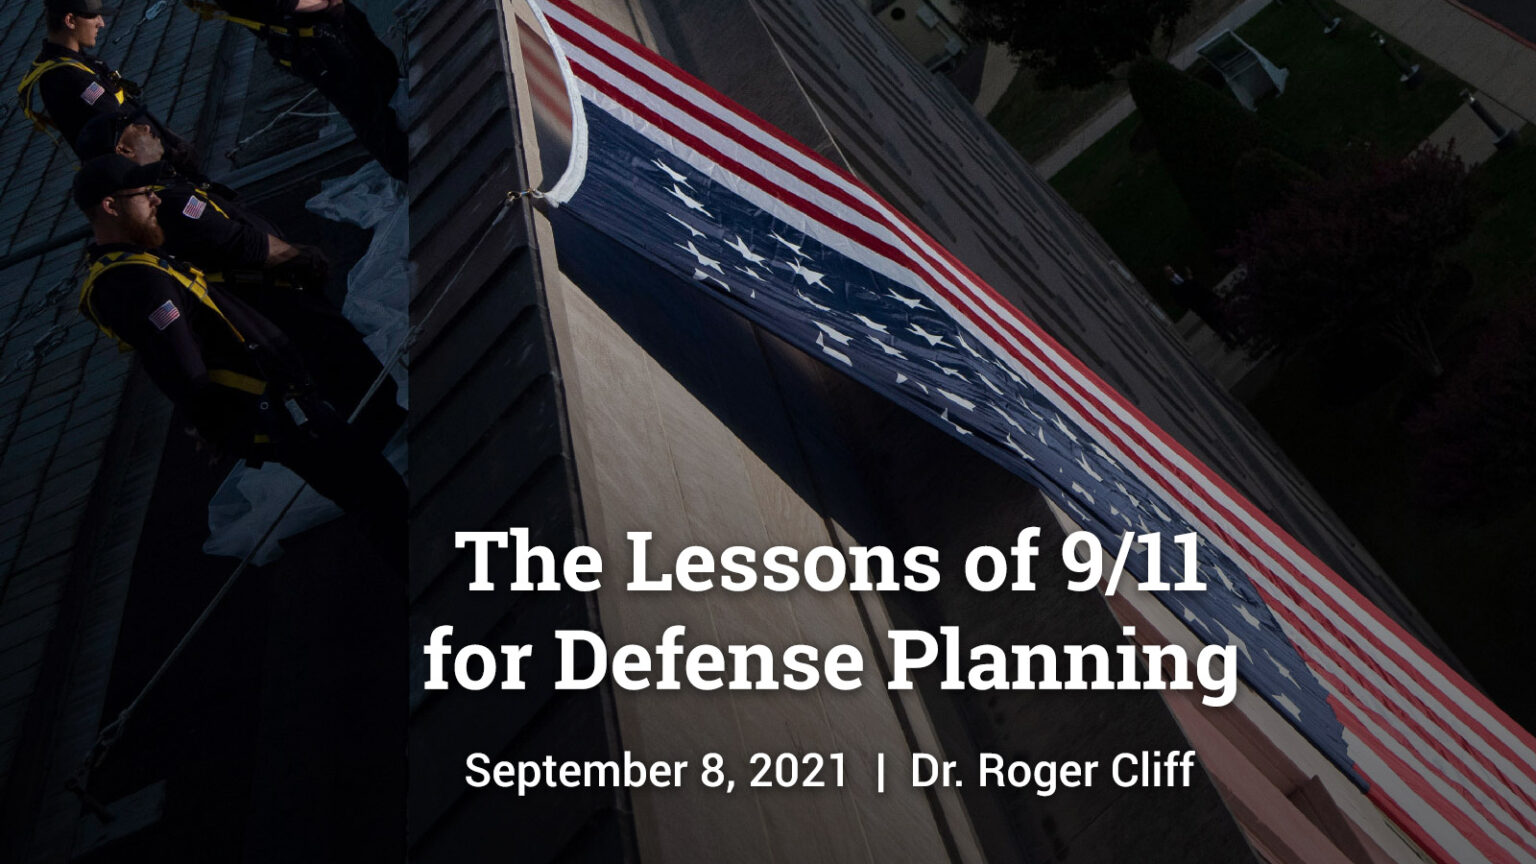  The Lessons of 9/11 for Defense Planning | Cliff